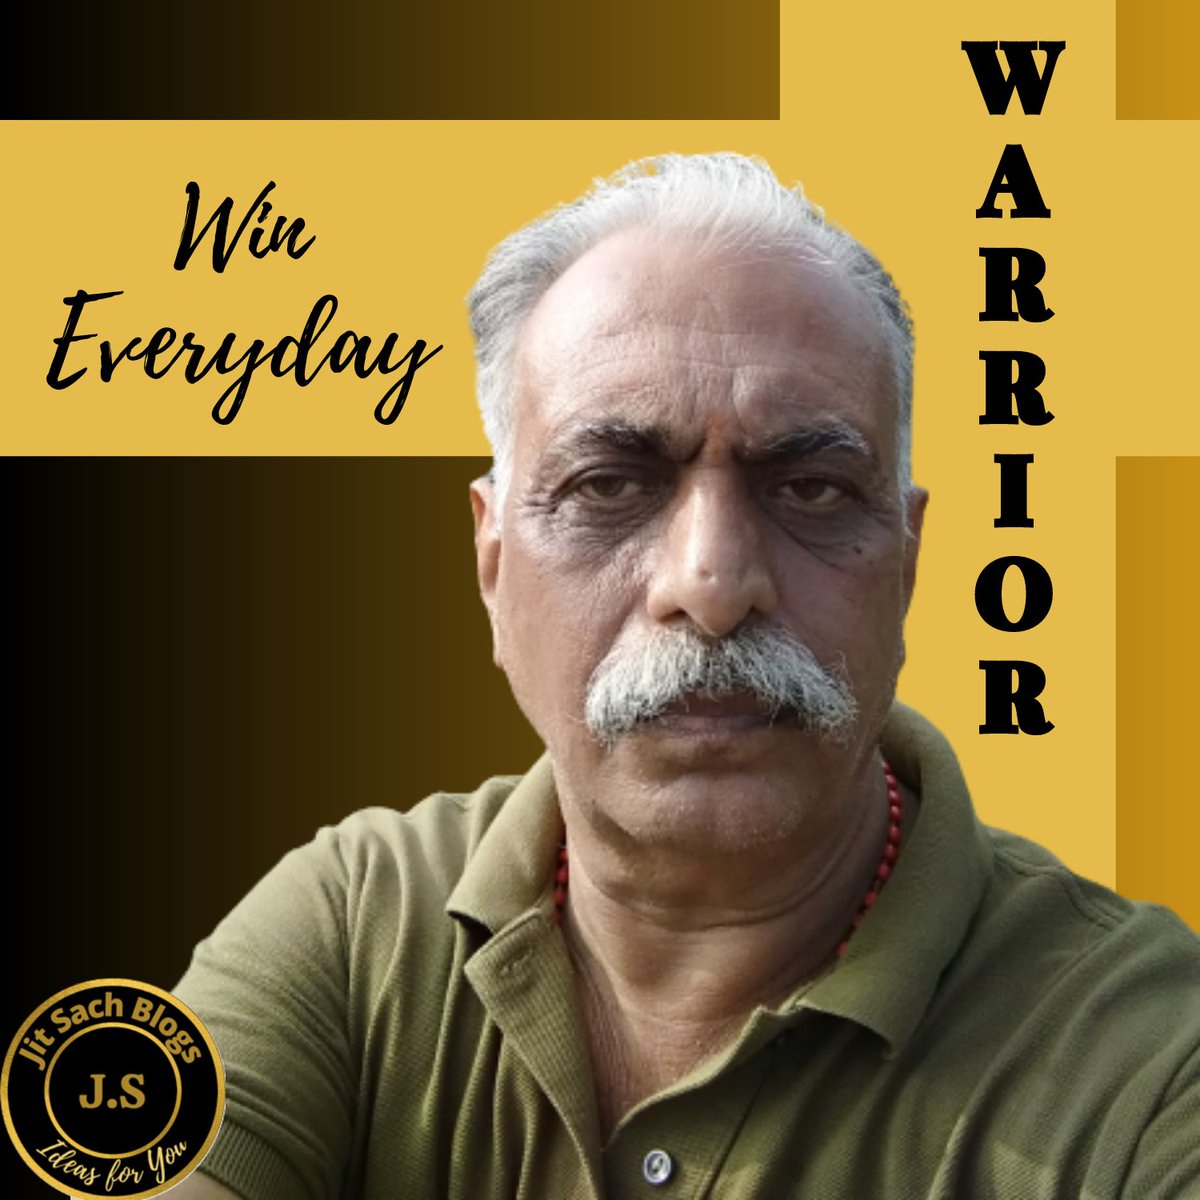 Prepare yourself for winning.
Fight with internal flaws, odds and problems as a warrior.  

jitsach.blogspot.com 

#jitsachblogs 
#motivation #motivating 
#win #winner #winning #everyday #prepare #warrior #fight #odd #problems #flaws #solve #solveproblems